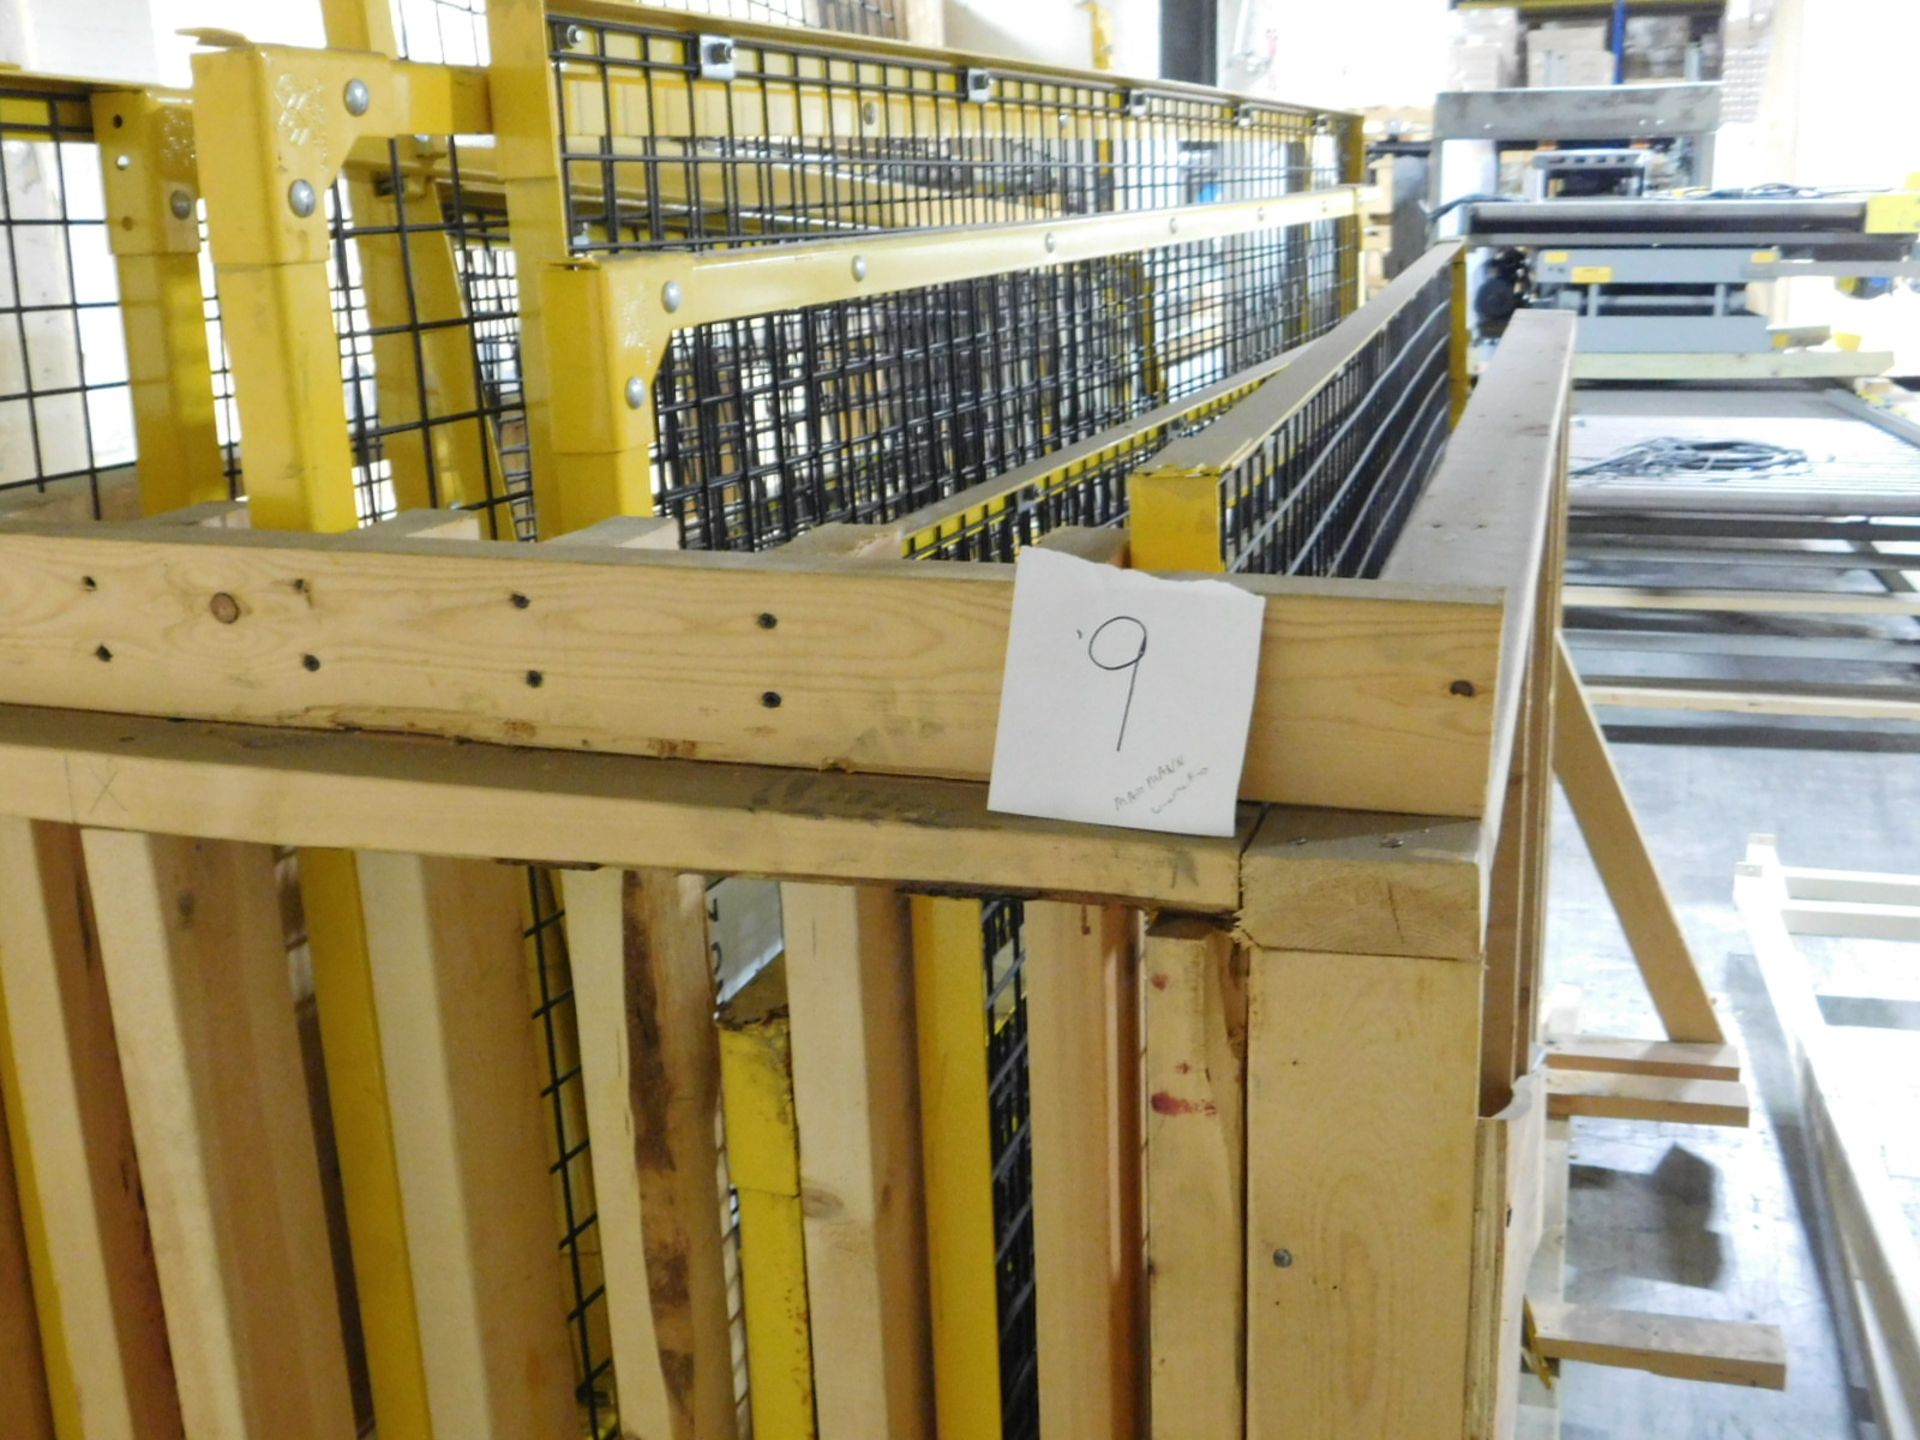 Wire Metal YellowCage Yellow/ black cage 15 PIECES with Fortress Interlock Clark Logistic - Image 4 of 5